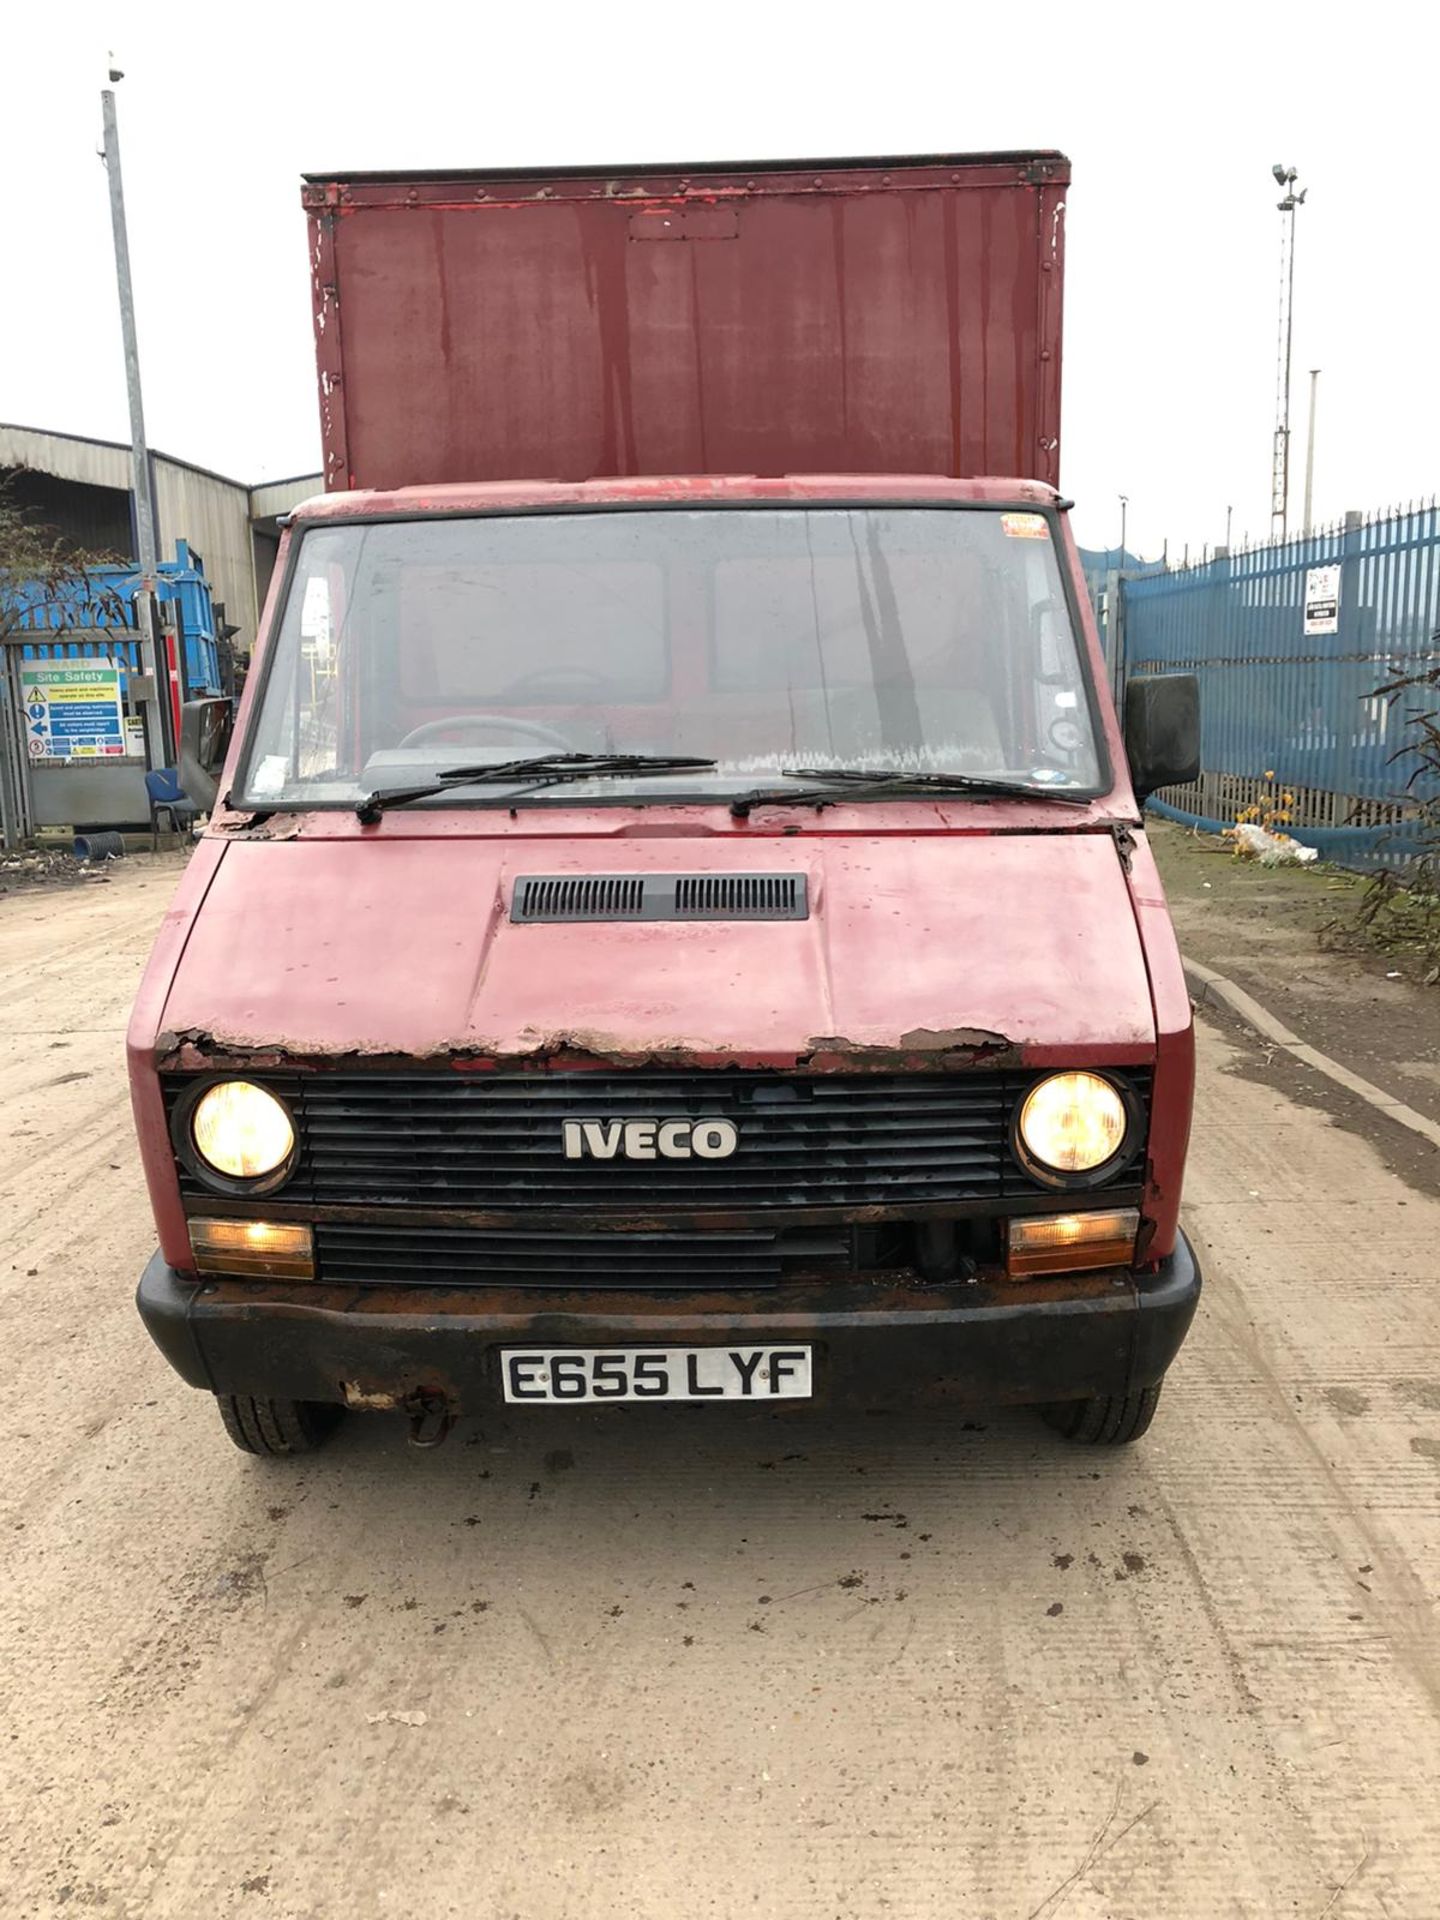 IVECO DAILY 4910 BOX VAN / OFFICE, 2.5 TURBO DIESEL (FIAT TYPE), SHOWING 34K MILES *NO VAT* - Image 2 of 18